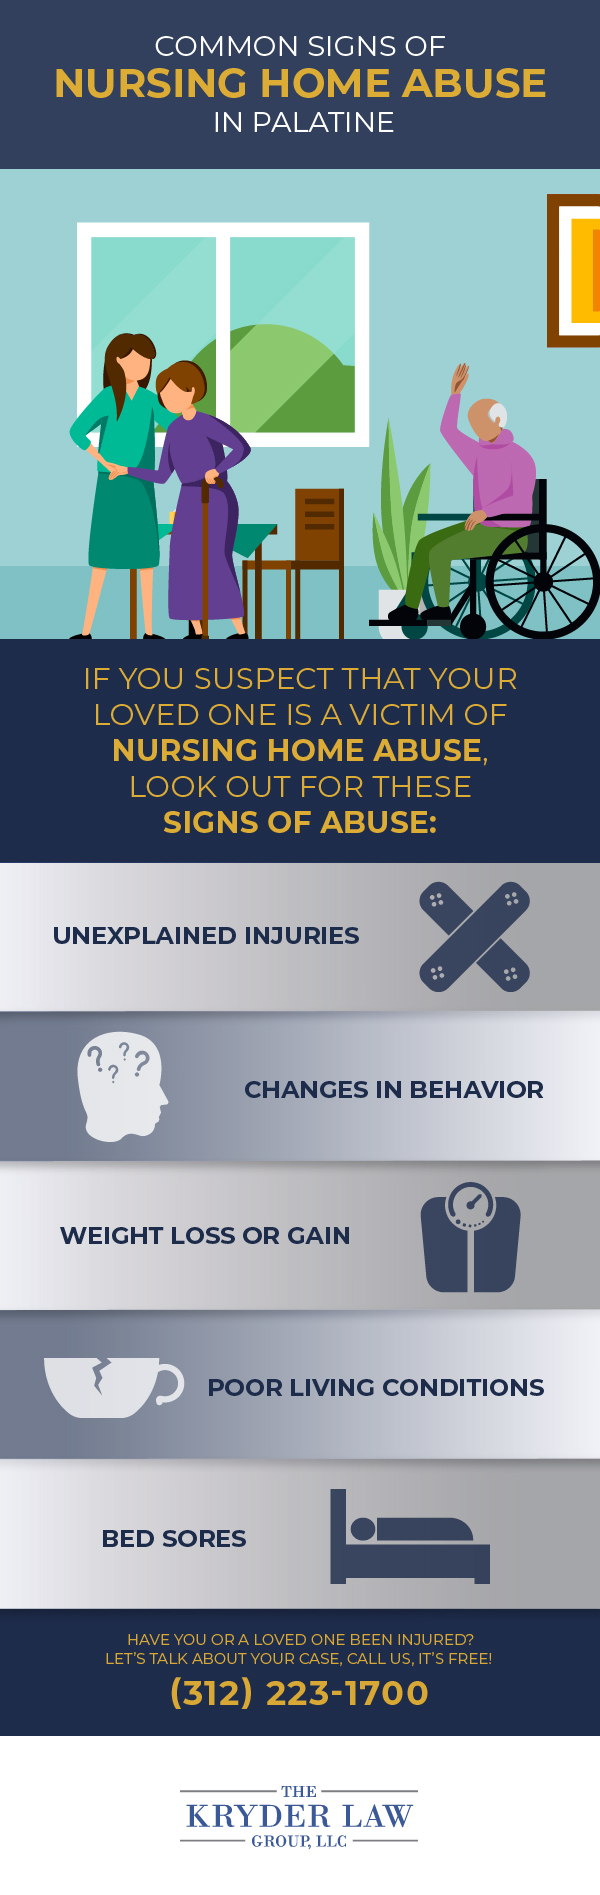 Common signs of Nursing Home Abuse in Palatine